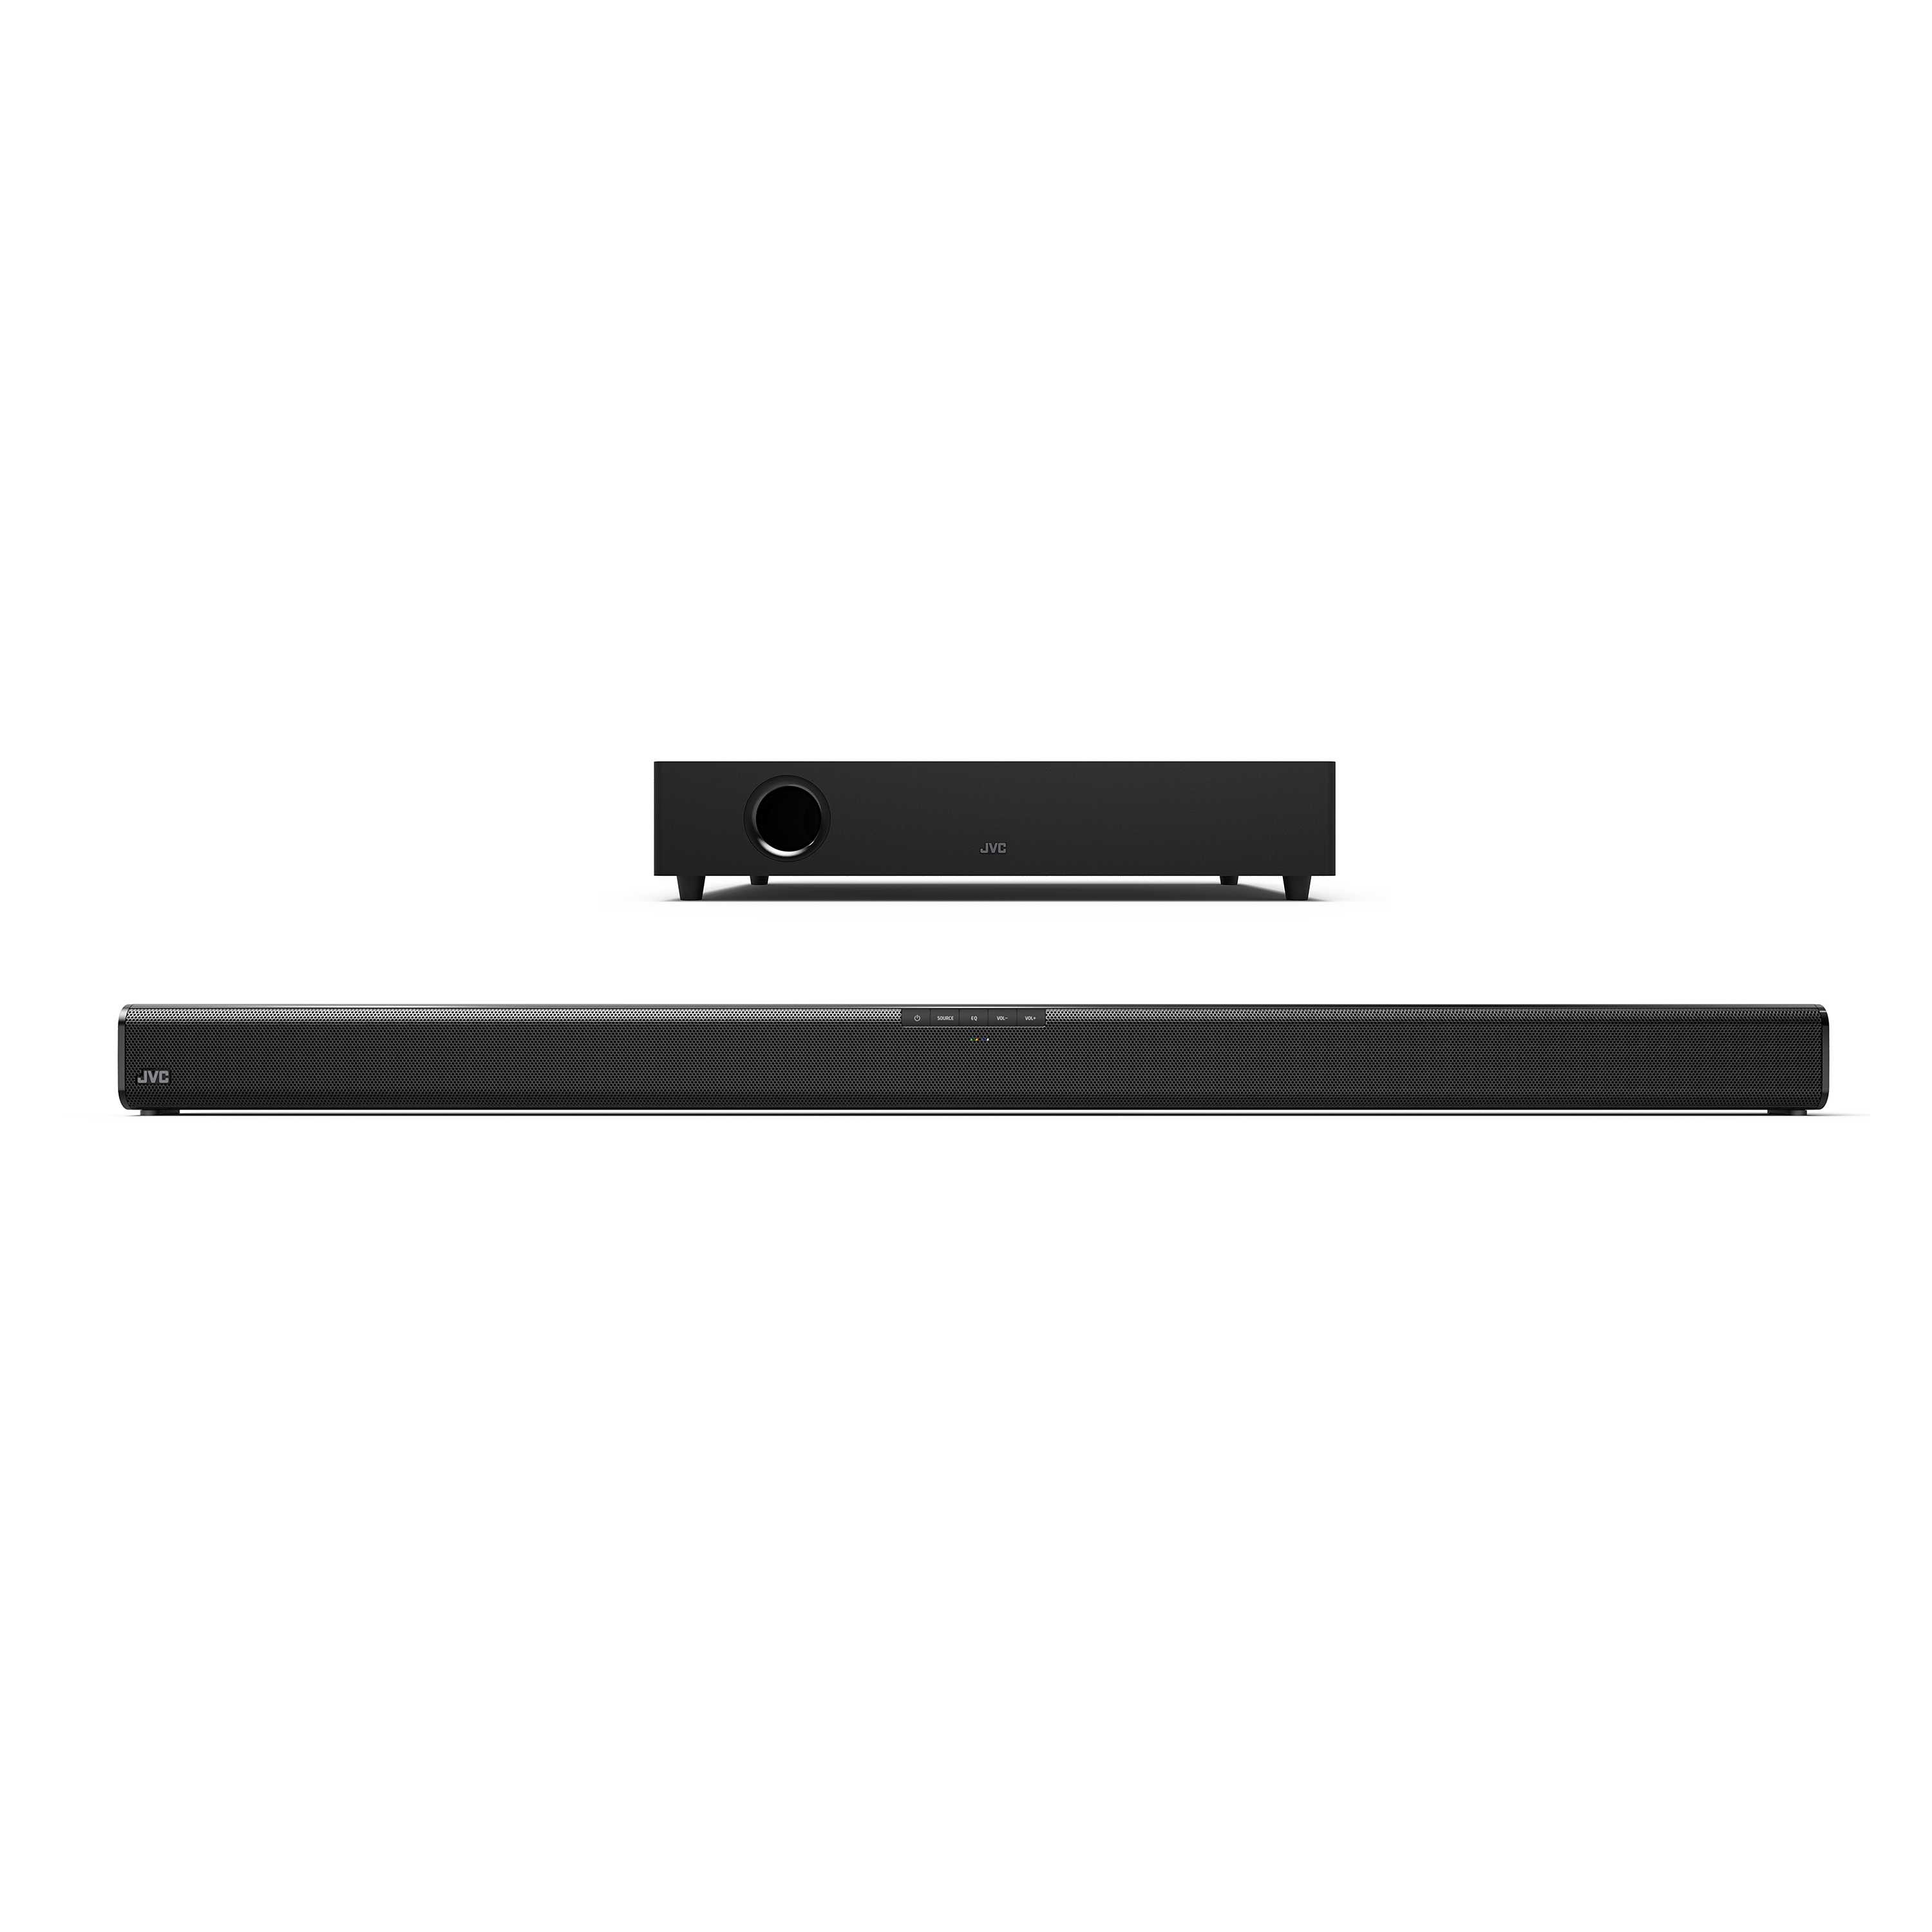 JVC 37″ 2.1 Bluetooth sound bar with wireless subwoofer for $80